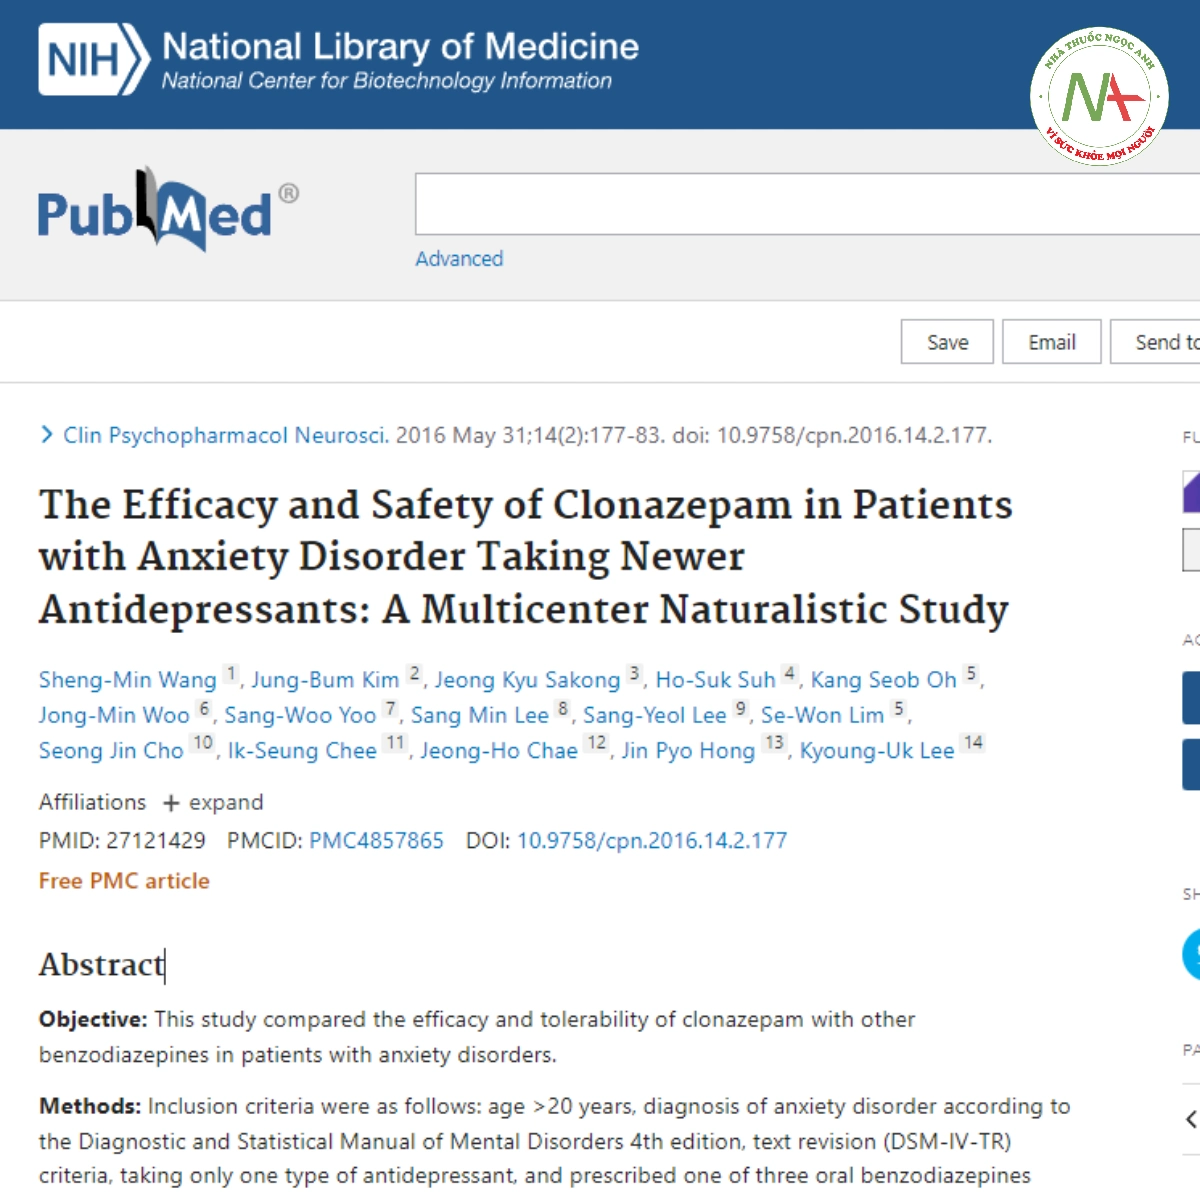 The Efficacy and Safety of Clonazepam in Patients with Anxiety Disorder Taking Newer Antidepressants: A Multicenter Naturalistic Study